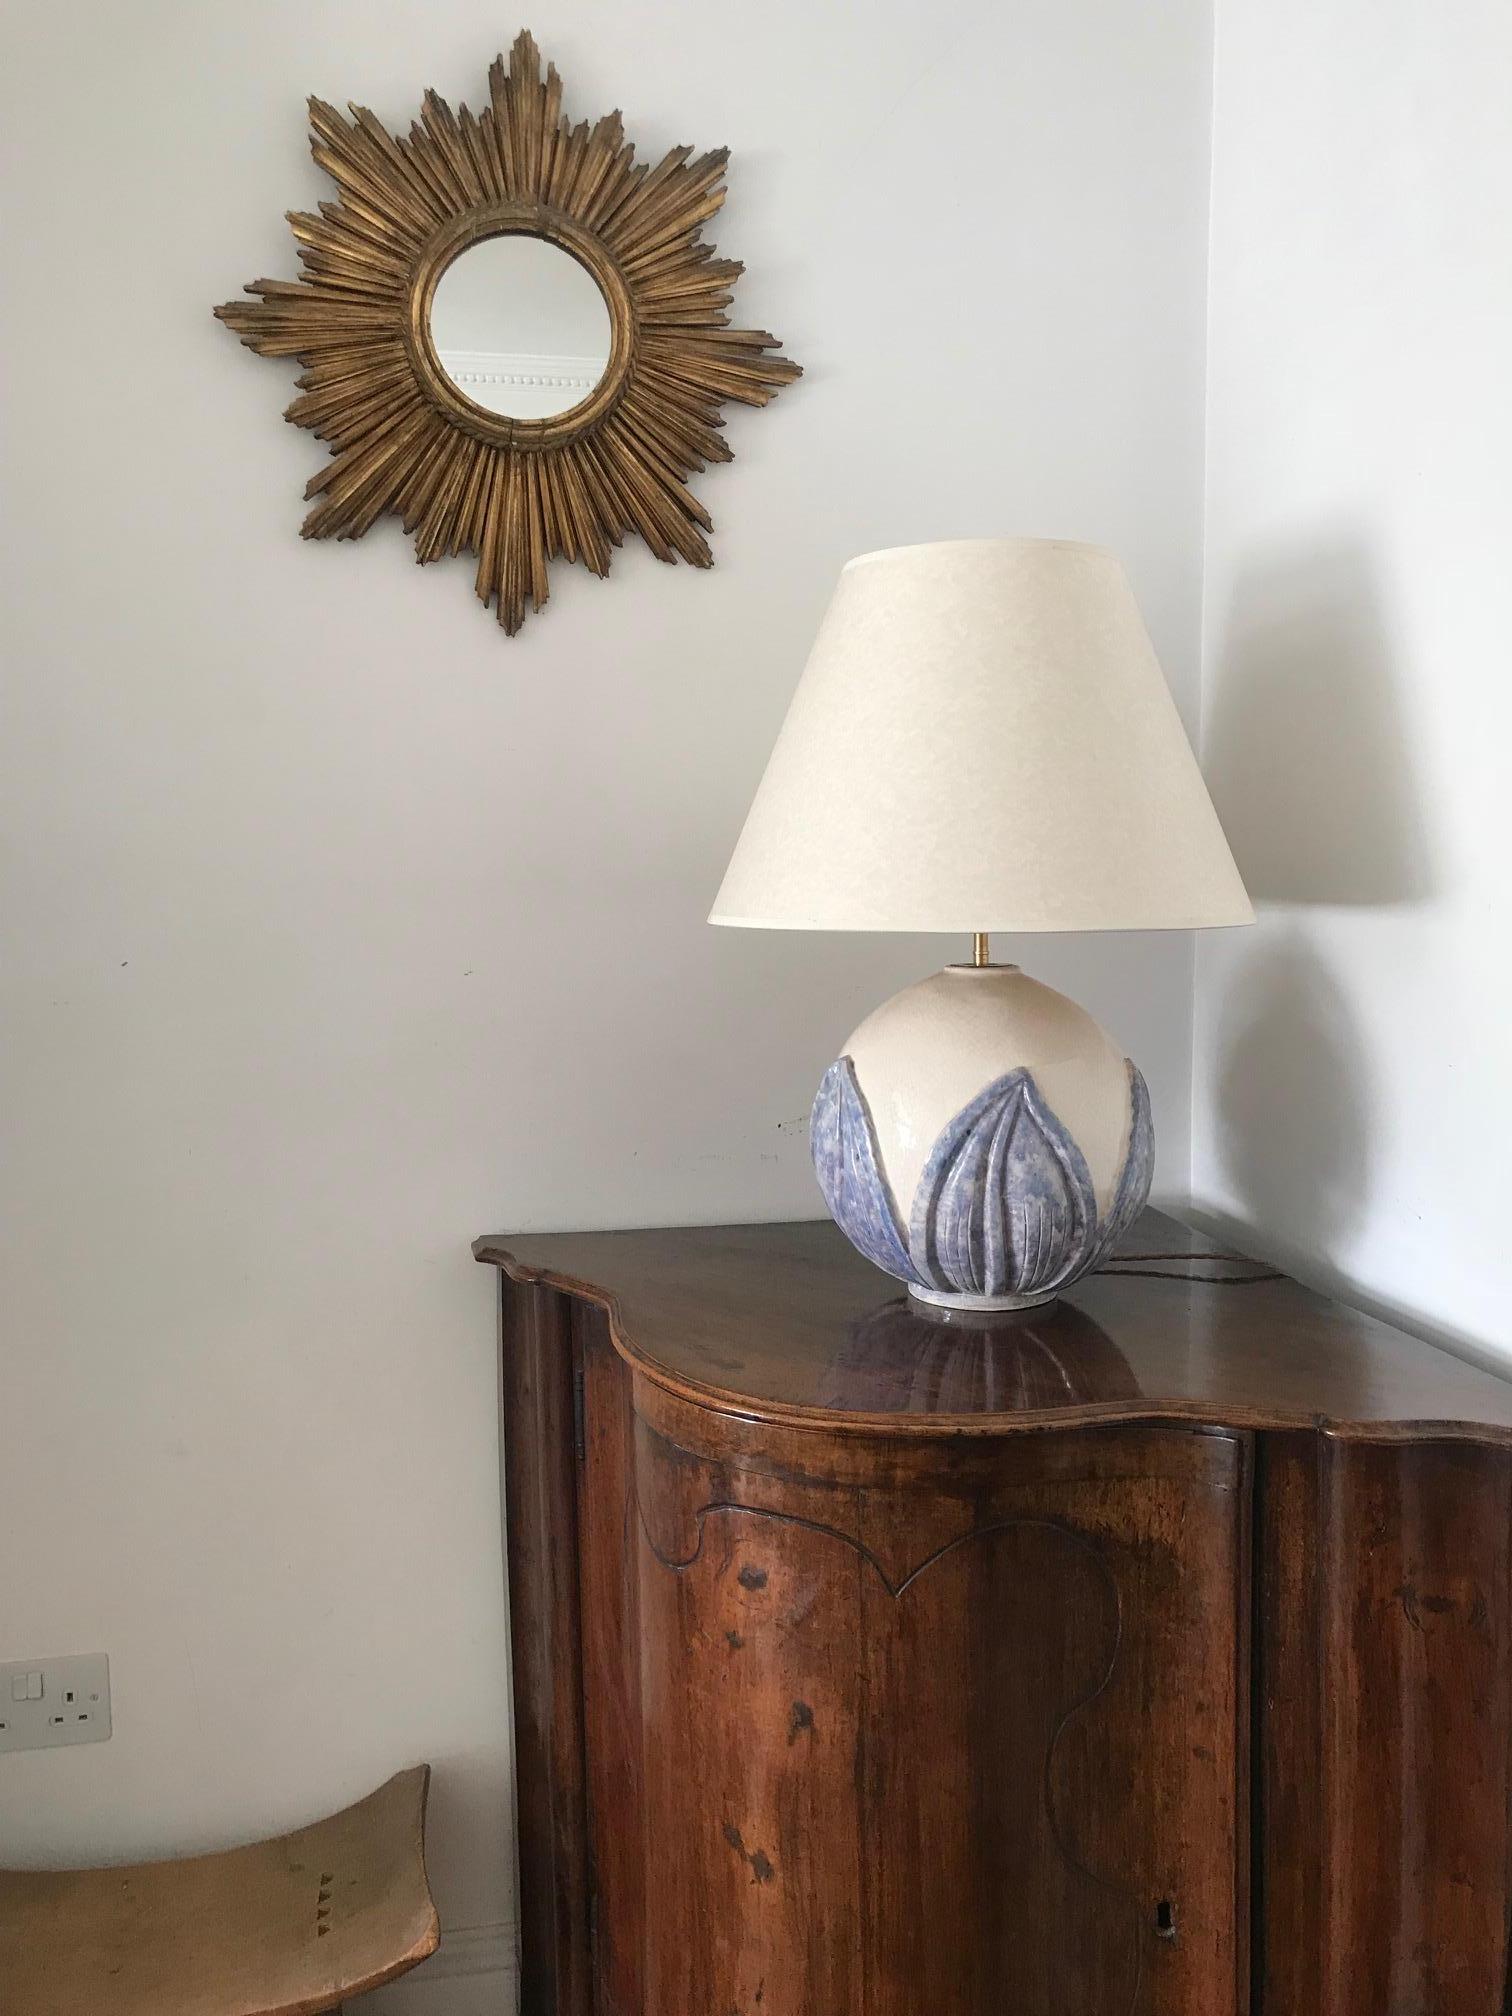 A large crackle glazed, French, 1930s spherical globe lamp signed Wibaux. Decorated with blue relief lotus leaves. A beautiful example of early French art deco design. There is a surface crack to the rim on the base of the lamp, but this is